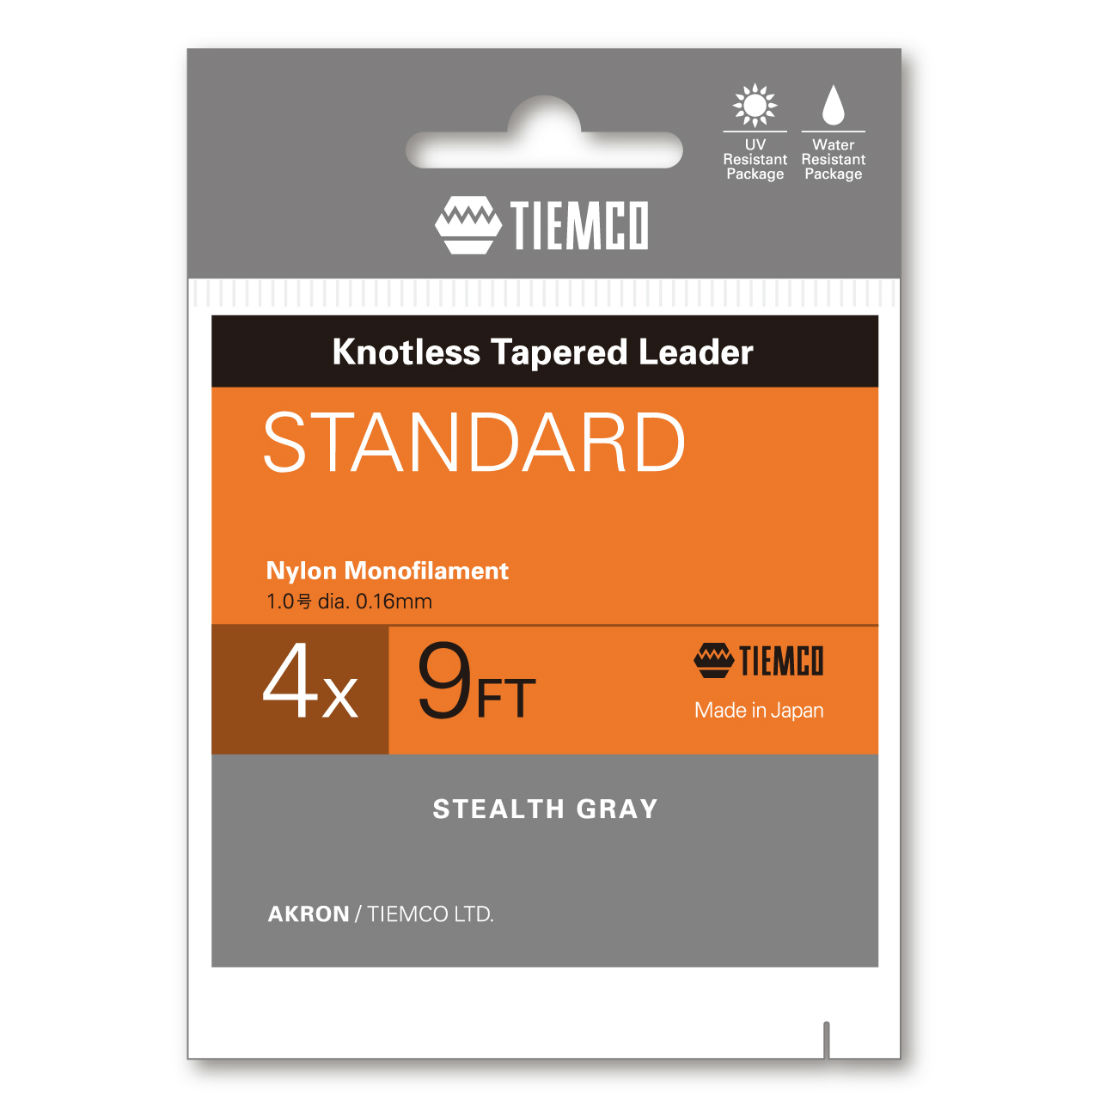 INAINTAS FLY TIEMCO STANDARD TAPERED LEADER 9ft 5X